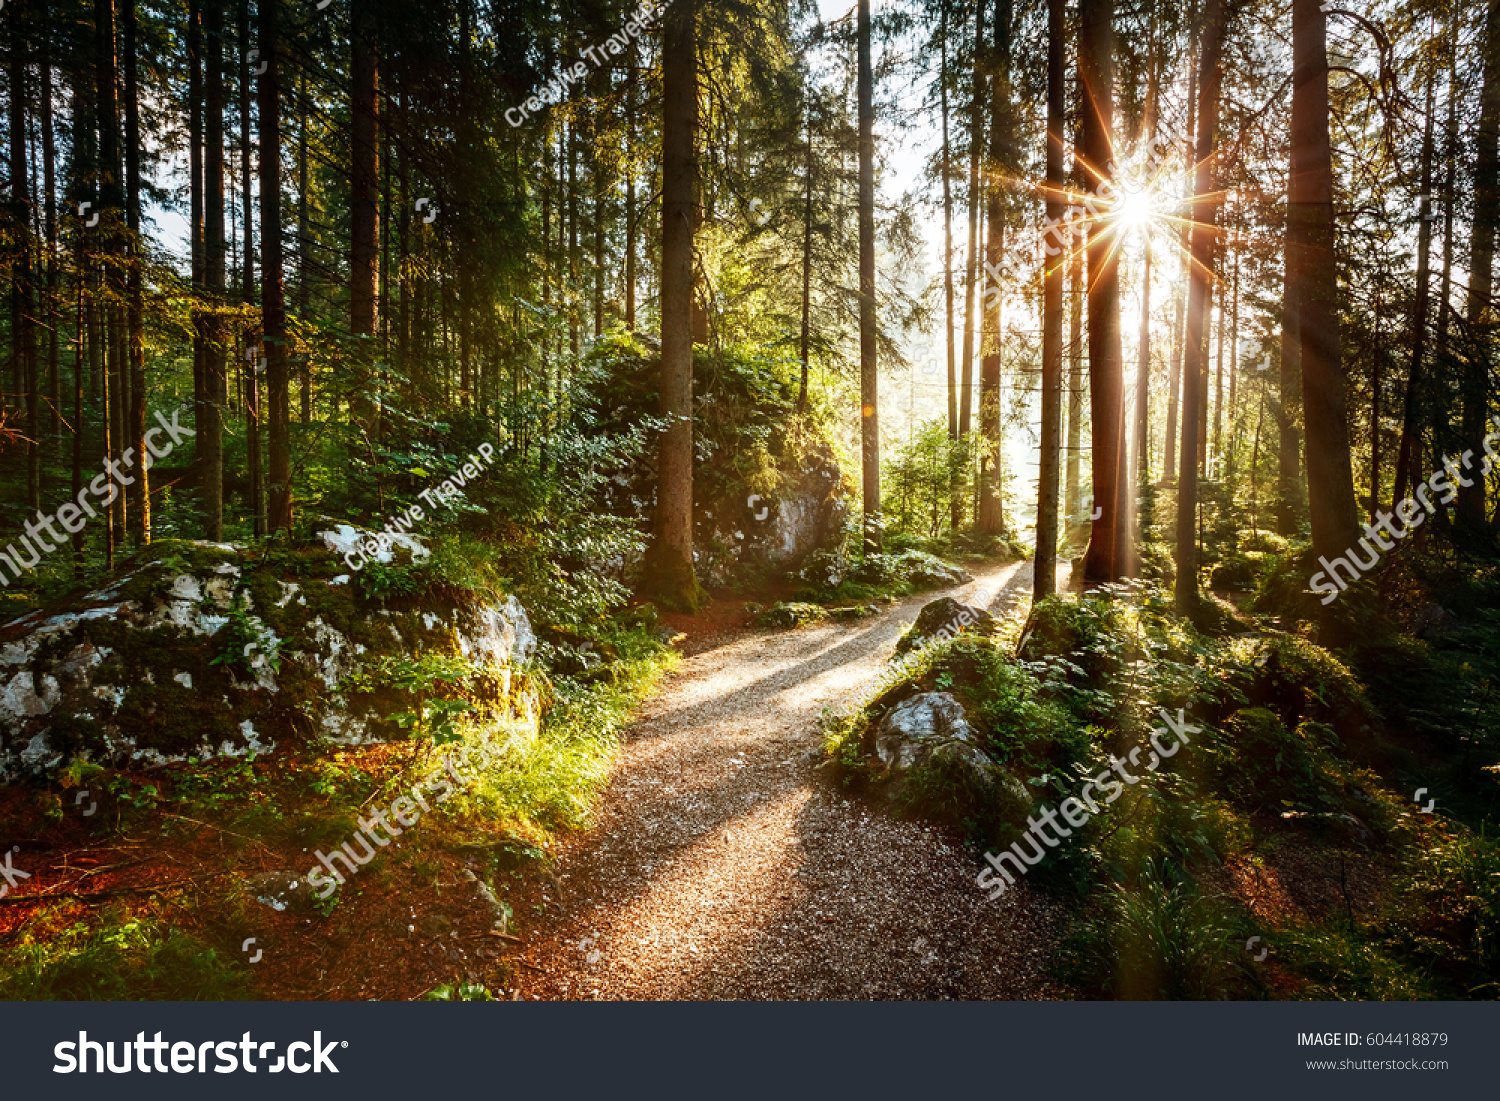 Magical scenic and pathway through woods in the morning sun. Dramatic scene and picturesque picture. Wonderful natural background. Location place Germany Alps, Europe. Explore the world's beauty. #604418879